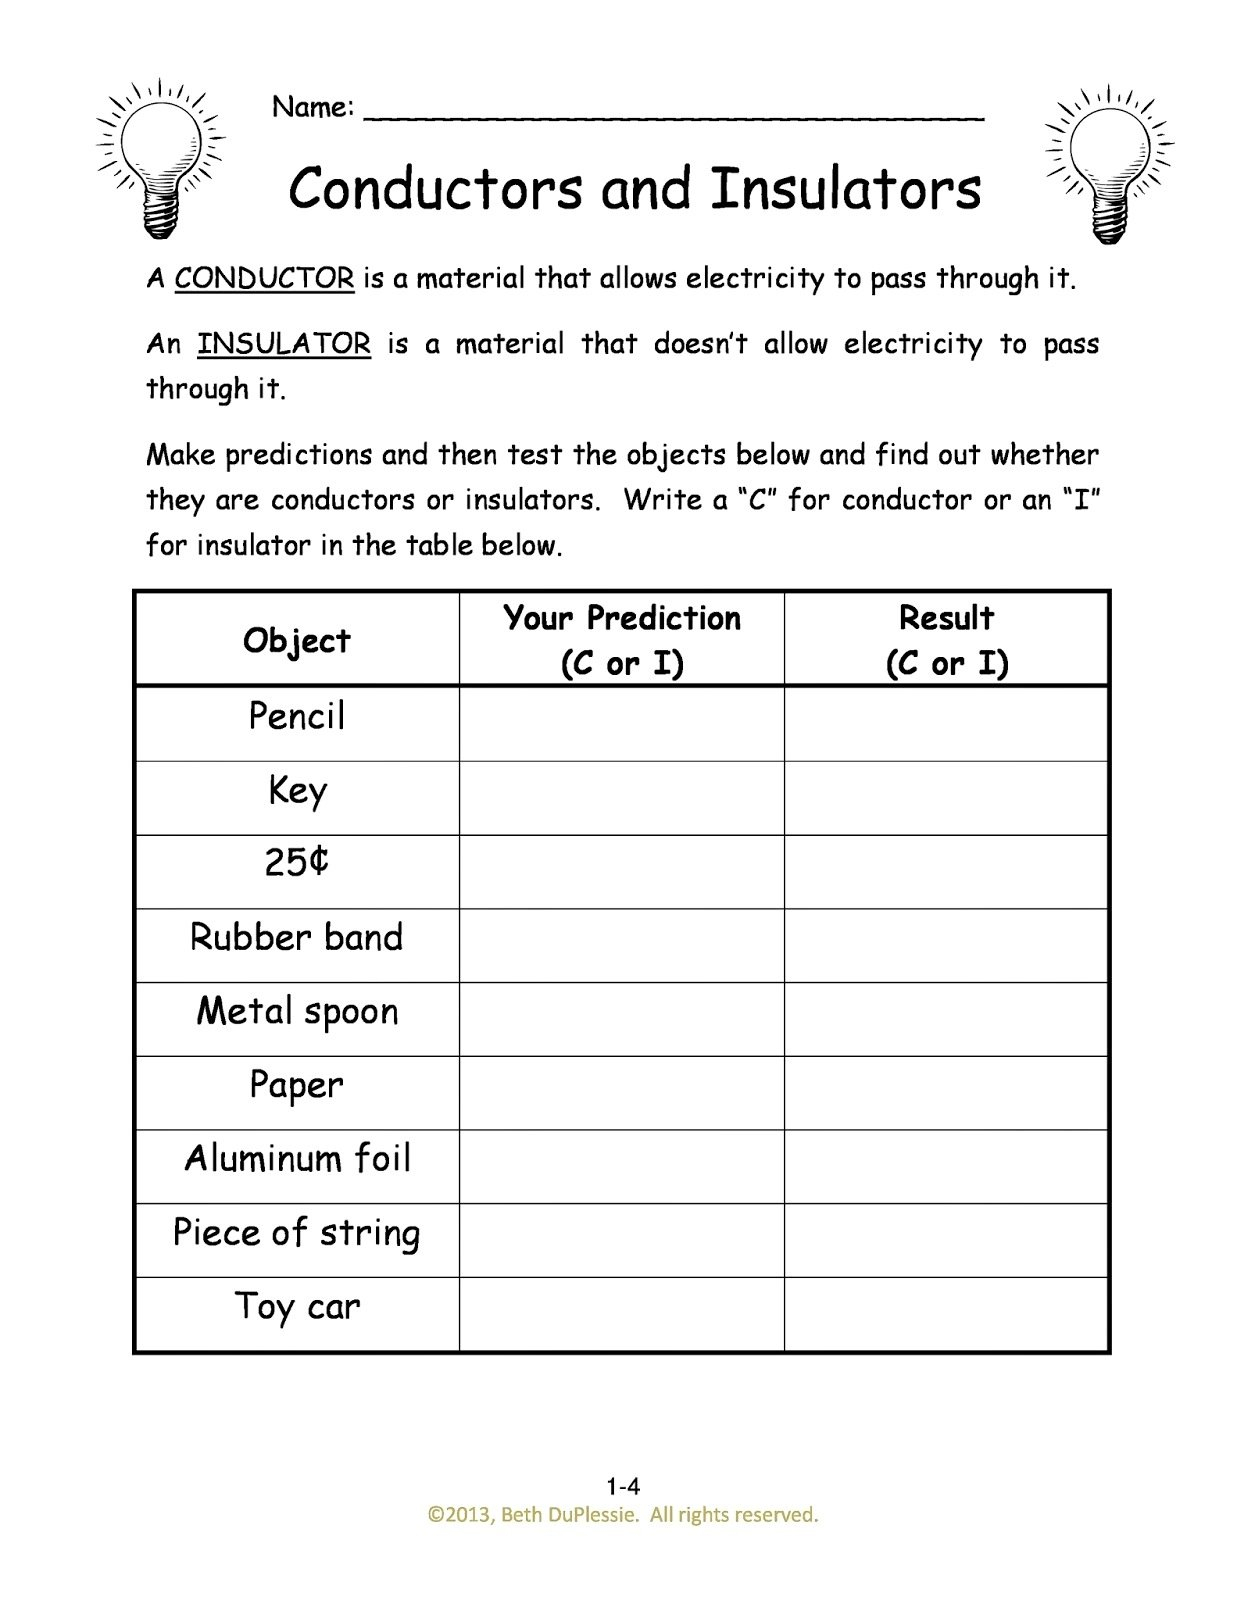 Component Electrical Circuit Worksheet Mr Murrays Website Week As Well As Electrical Circuit Worksheets